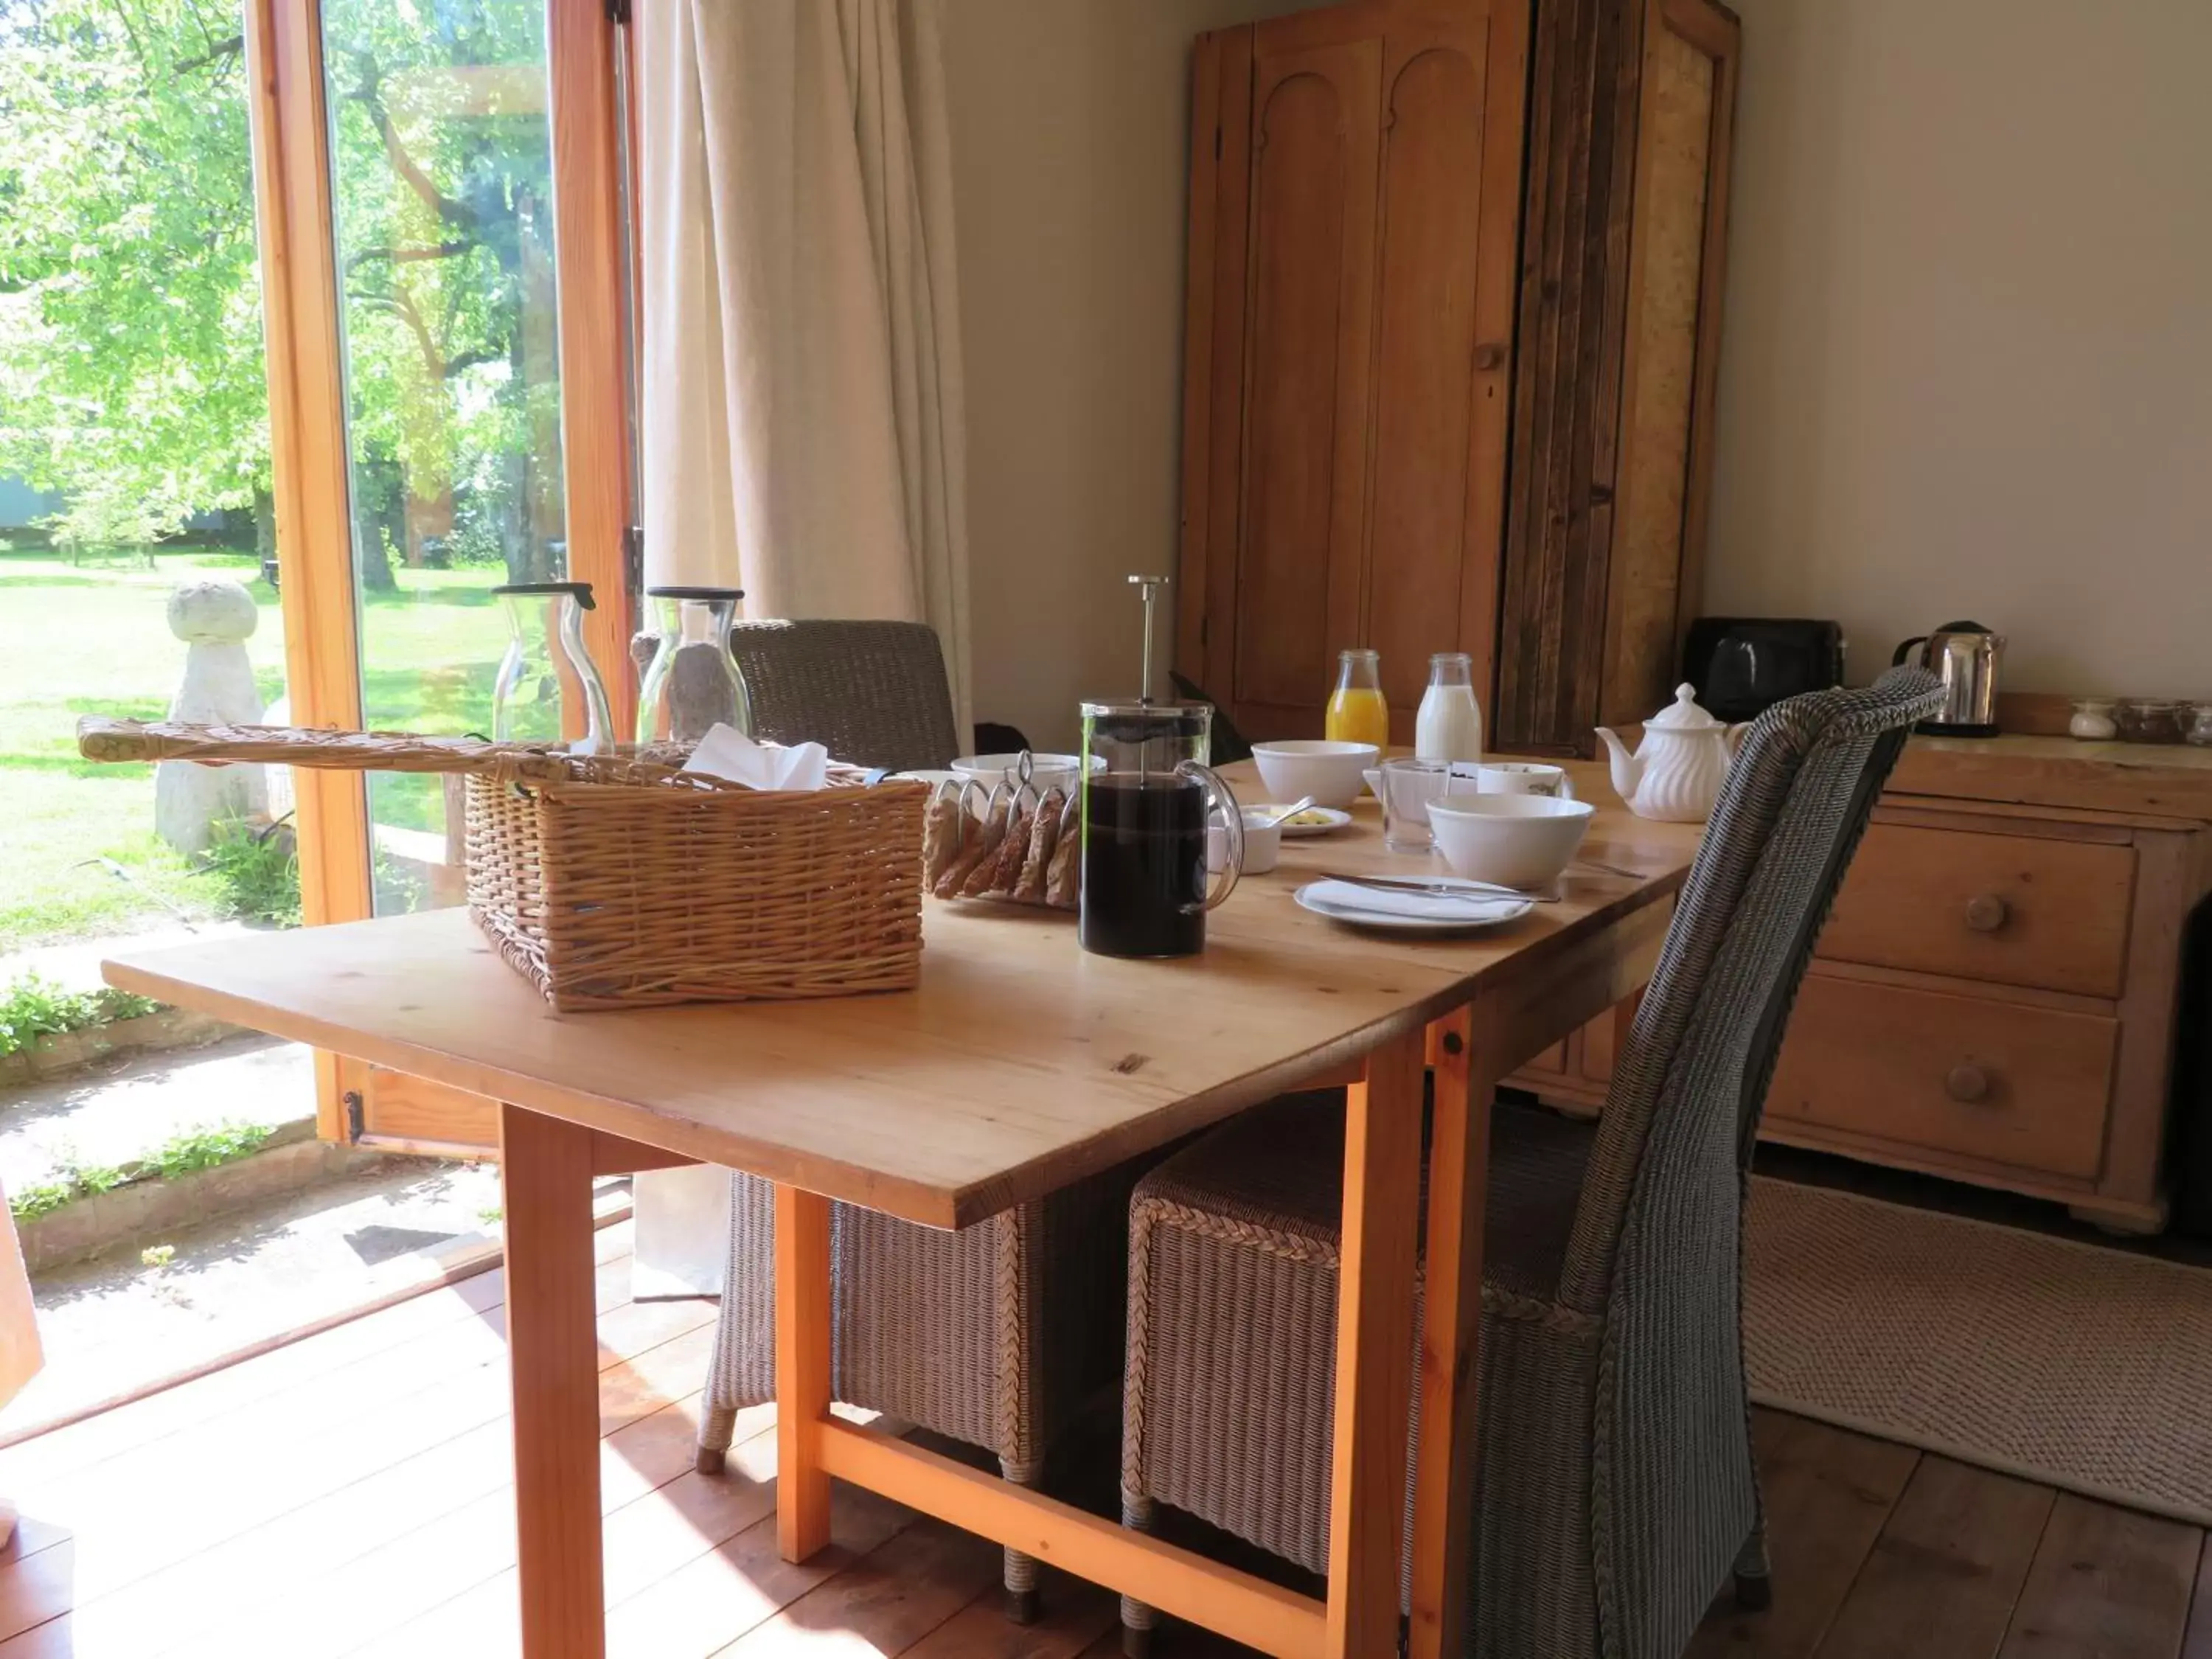 Wilderness B&B 3 Self Contained Rooms Nr Sissinghurst